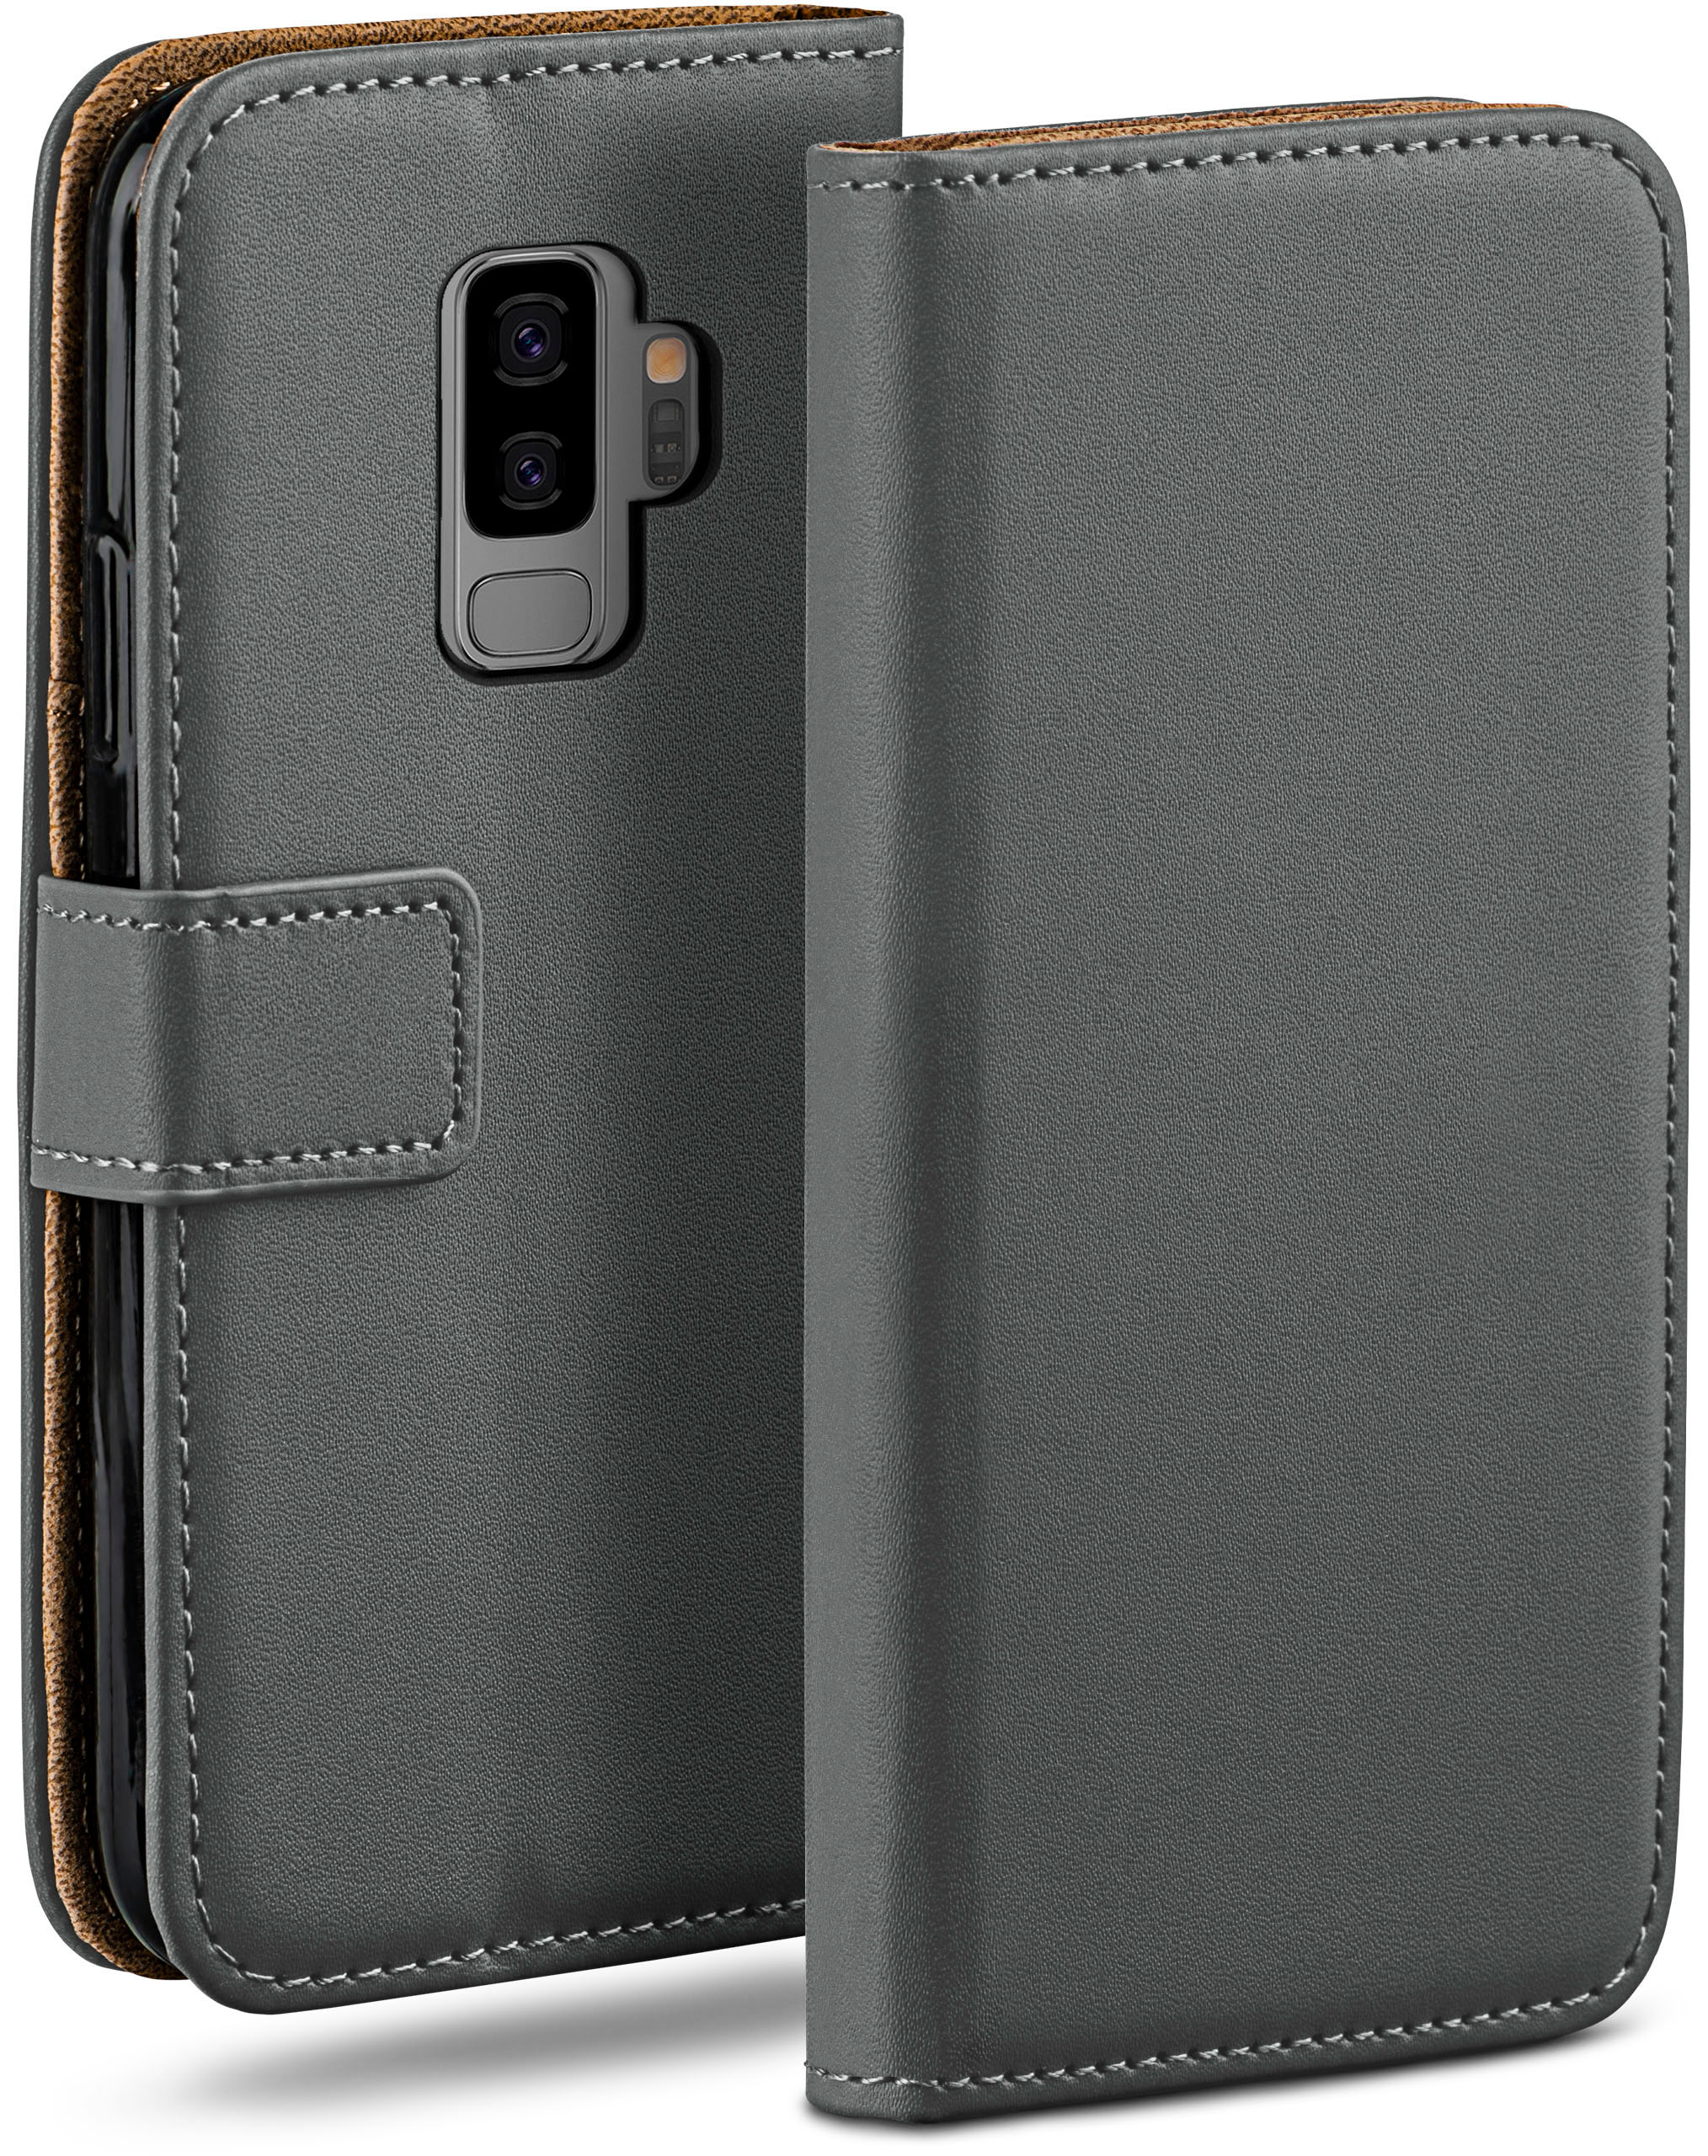 MOEX Book Plus, Anthracite-Gray Samsung, S9 Case, Galaxy Bookcover